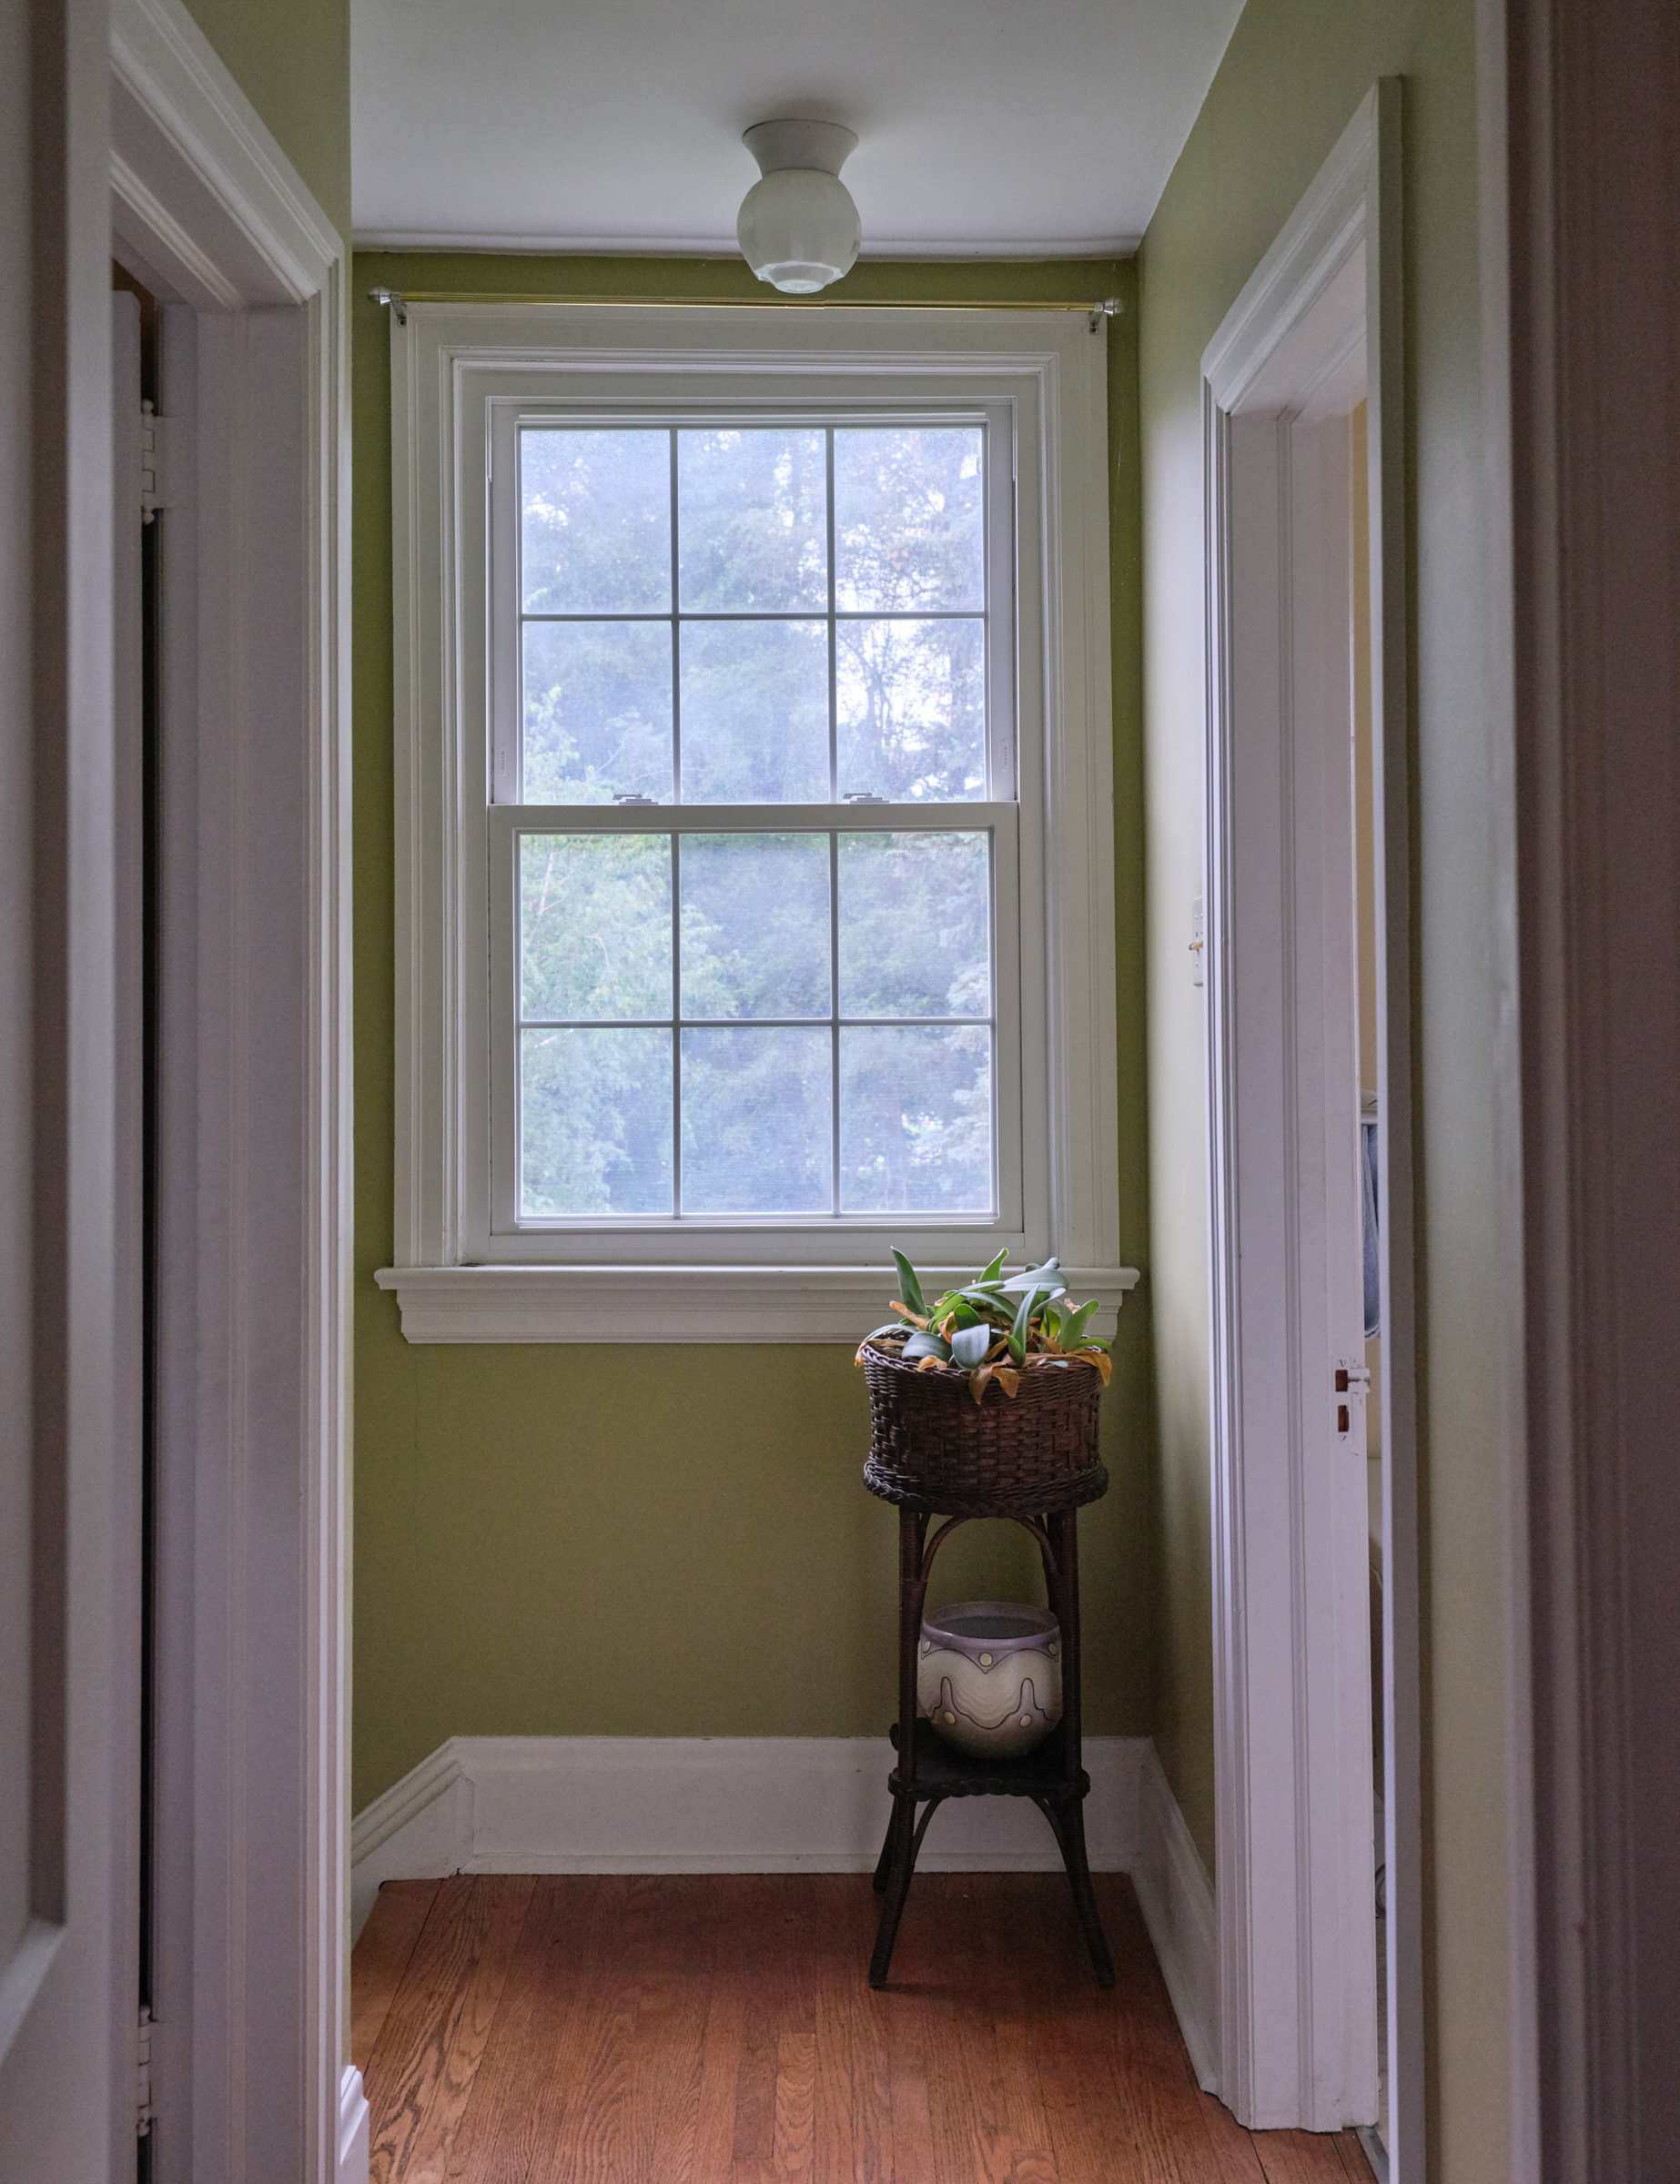     Steven Laurie, Planter Near Window, 2021, from the series Mother&#8217;s House. Courtesy of the artist

